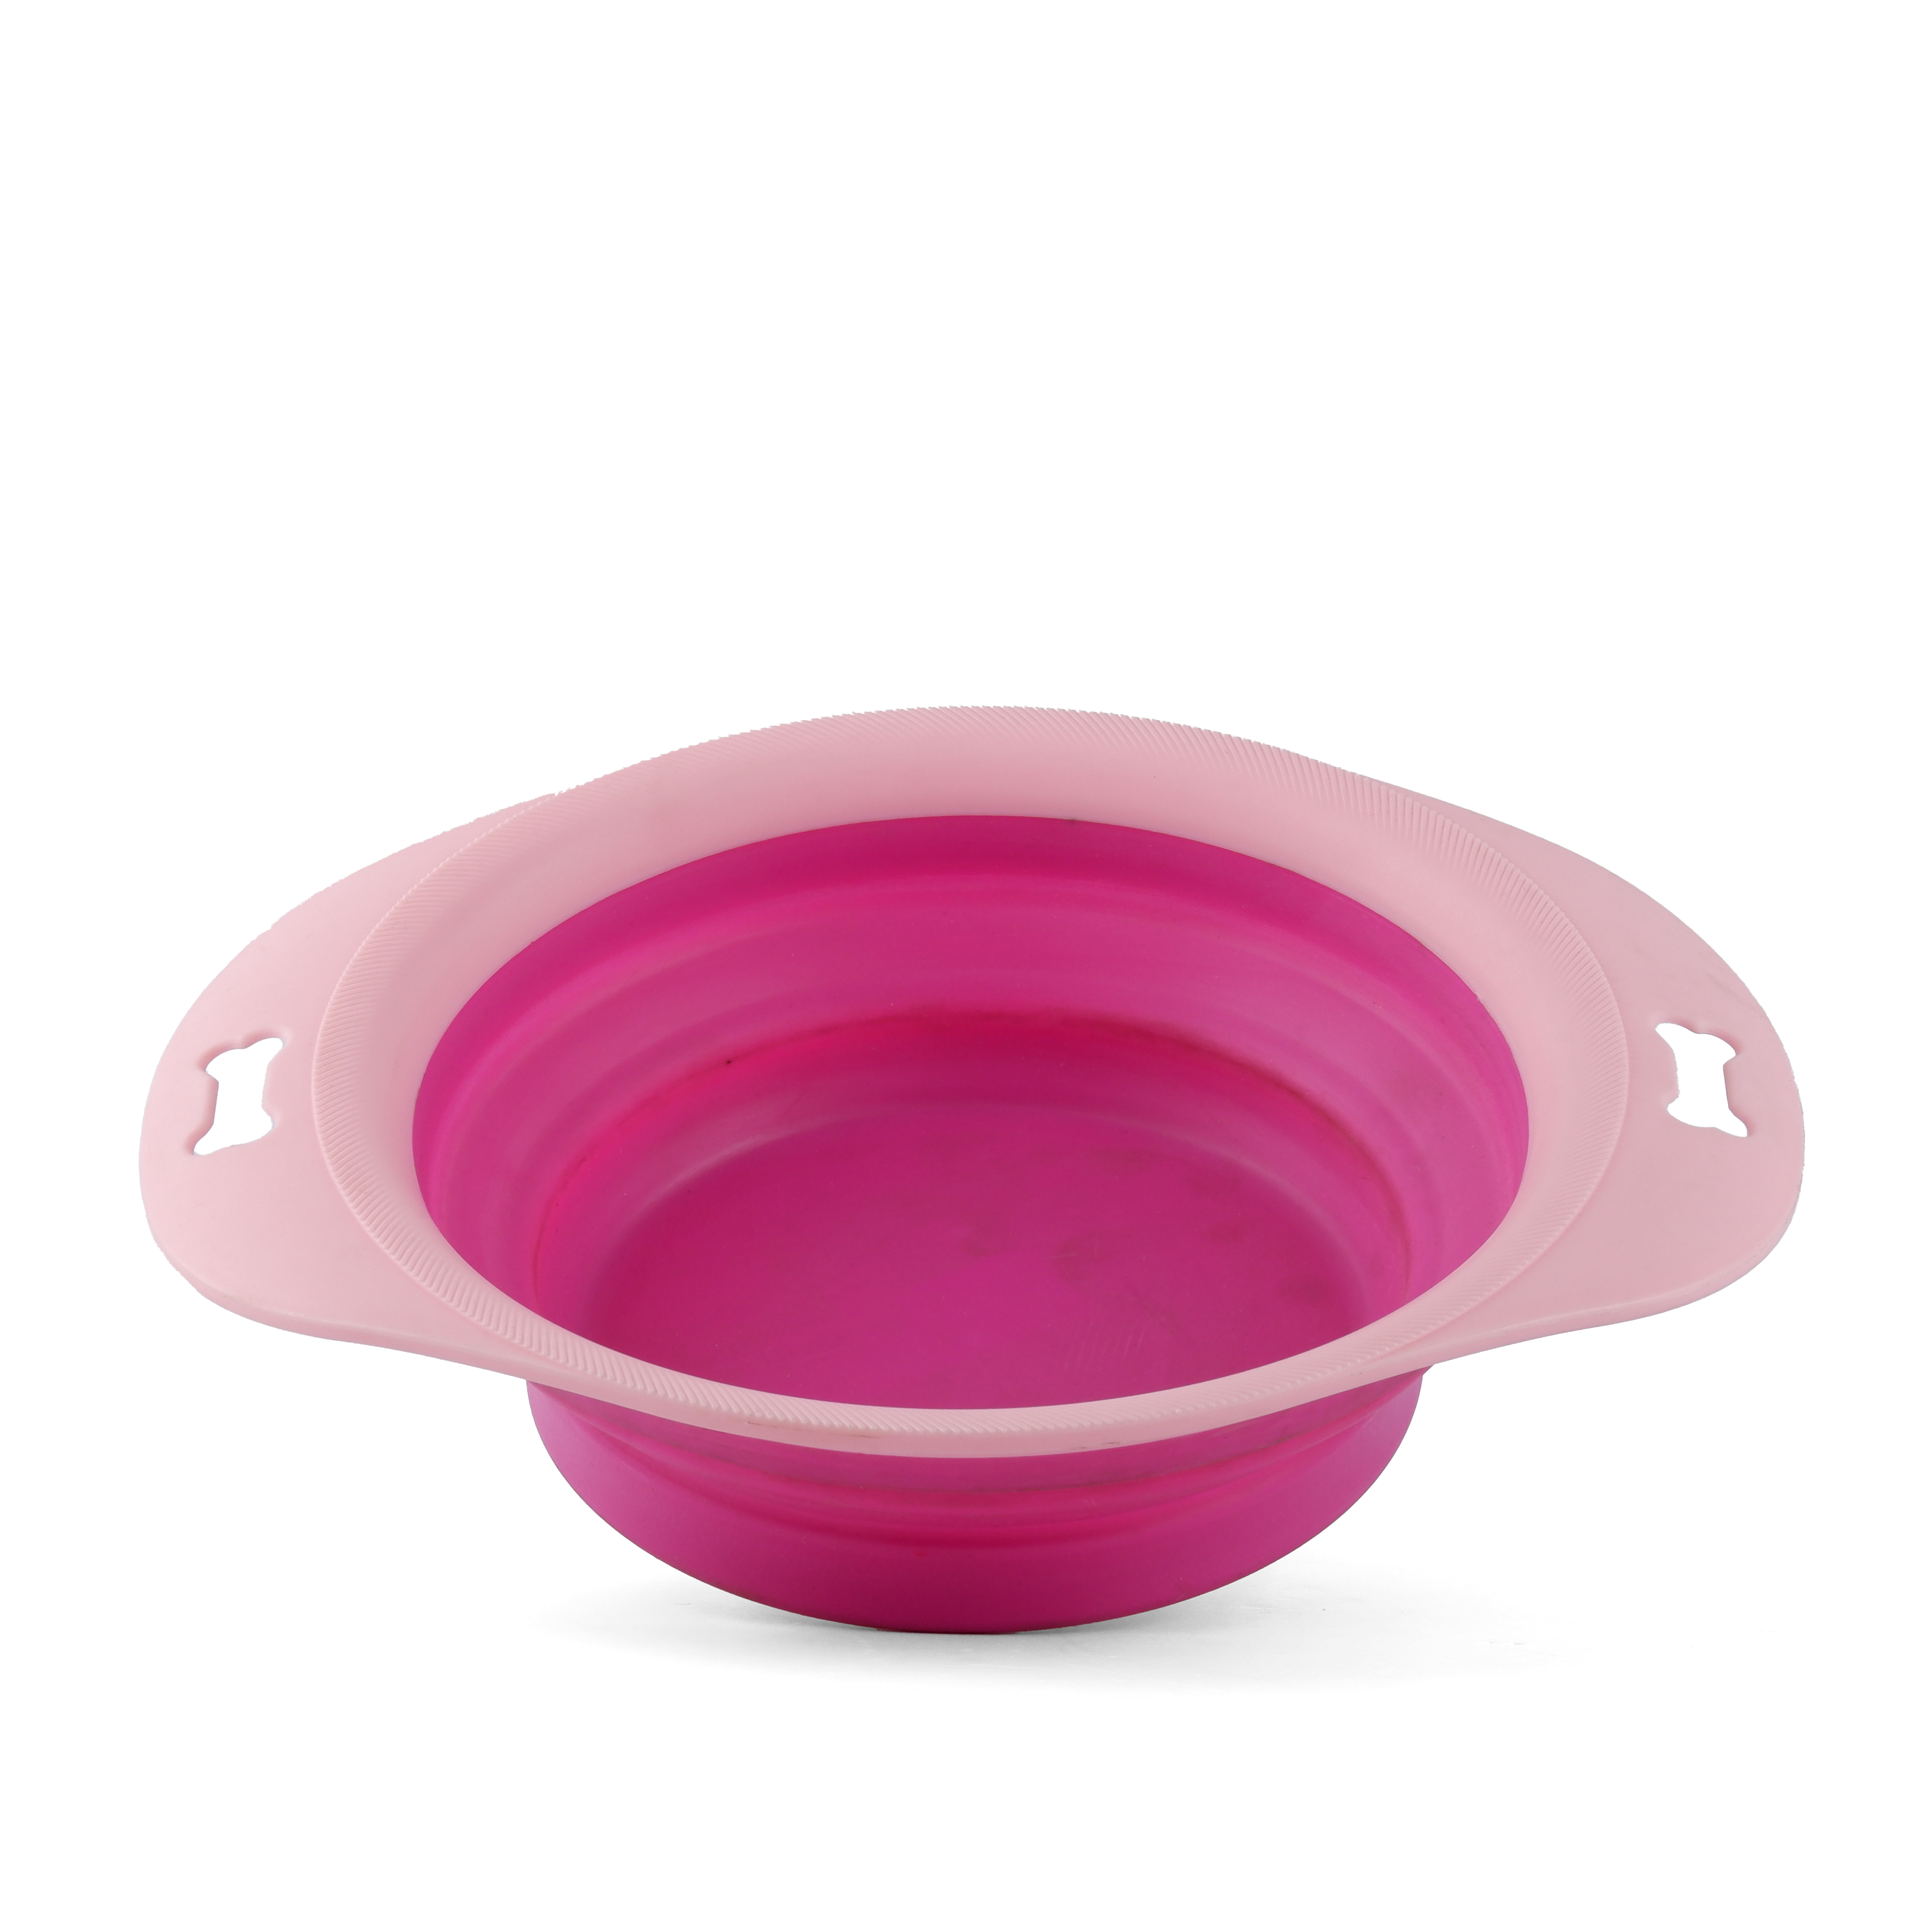 Pets Empire Travelling Bowl for Dogs and Cats (Pink)